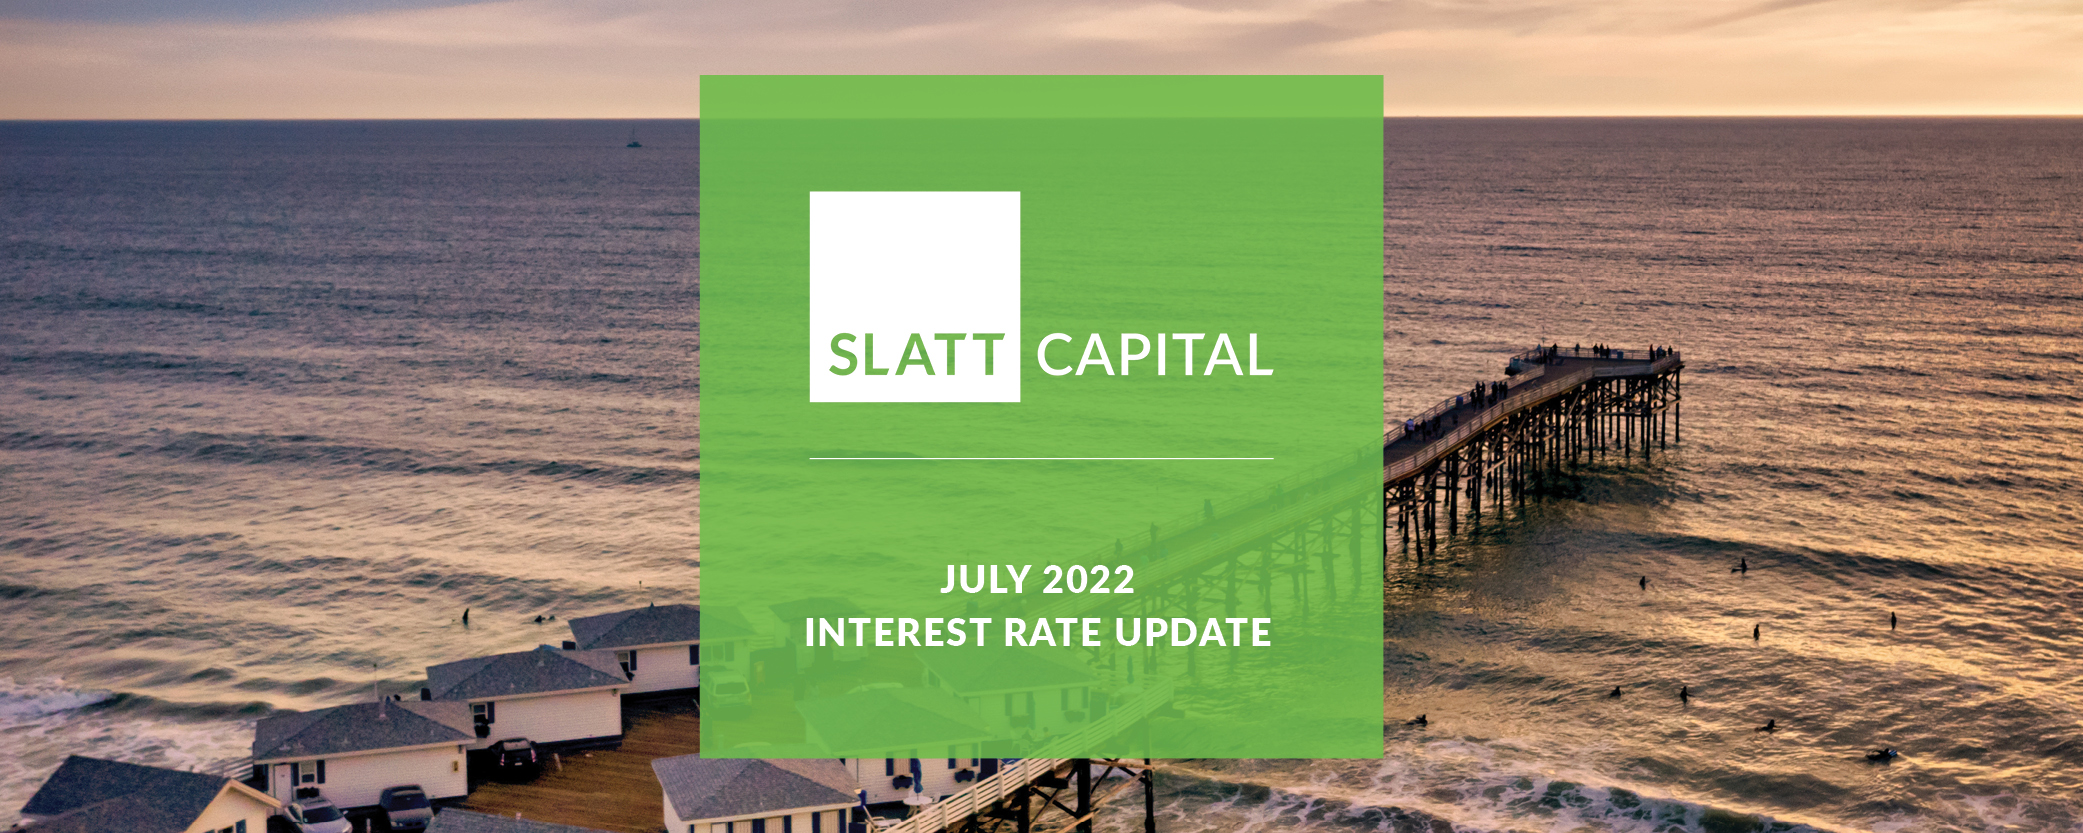 July interest rate update